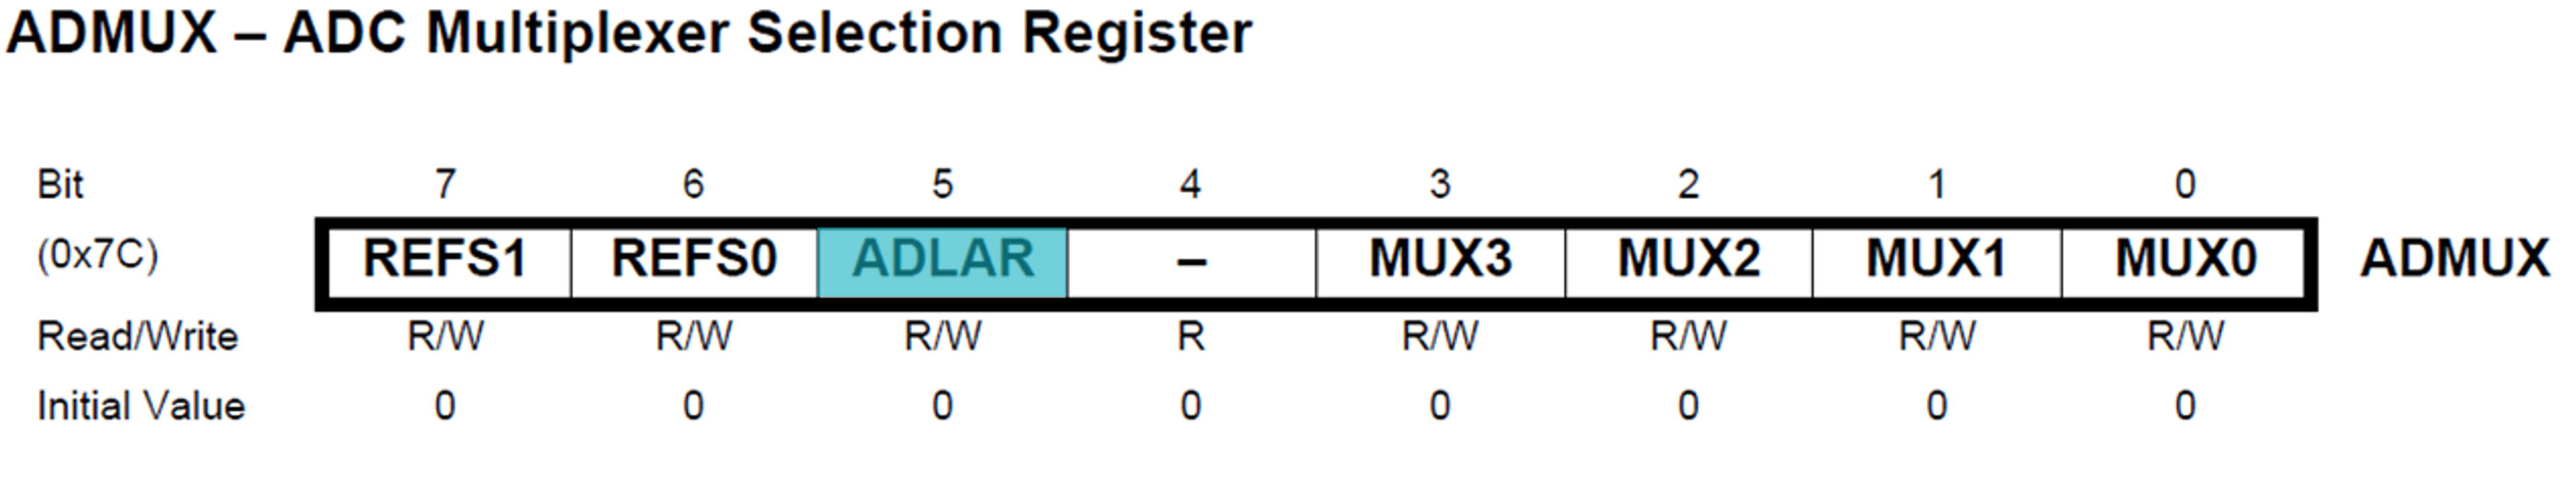 The ADMUX Register with bit5 highlighted